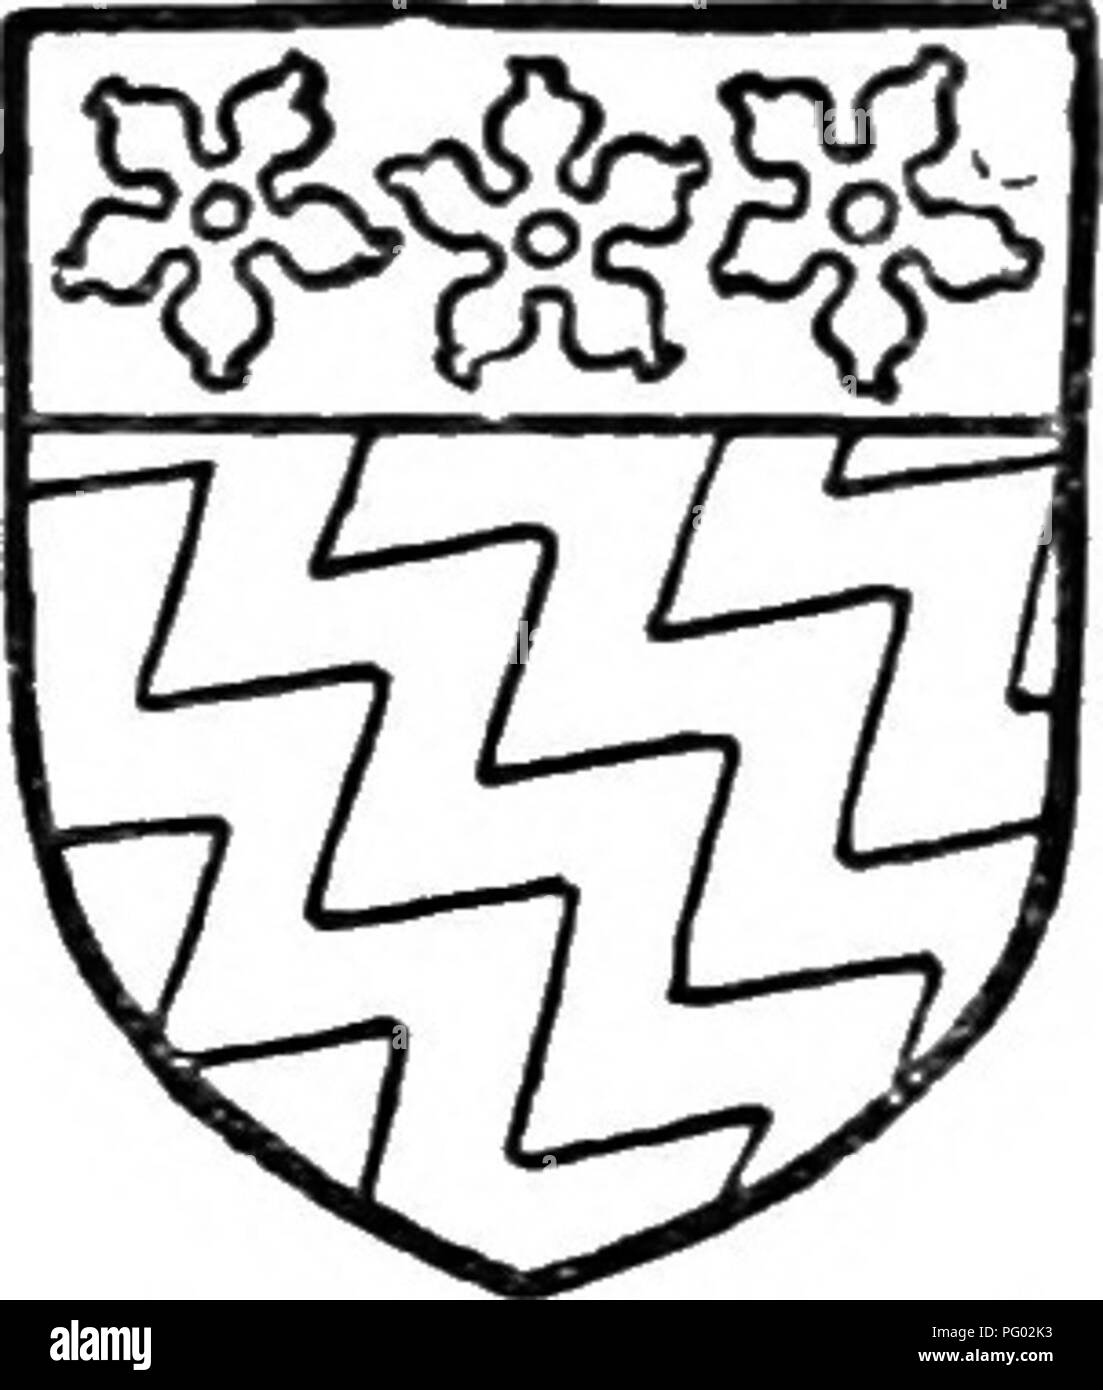 . The Victoria history of the county of Lancaster;. Natural history. Chisnall. Argent three cross/ets fitchy •within a bordure gules. RiGBY of Burgh. Bendy indented of six argent and azw:^ on a chief sable three cinjue- foils or. land in Worthington.' Roger de Chisnall and Margaret his wife in 1347 settled a messuage and land on Roger son of Ri-ger and Alice his wife, with remainders to Robert, John and Thomas, brothers of the younger Ro^cr.* For a century and a half there is little record of the family,* but John Chisnall, who died in 1525. w.is found to hold messuages and lands in Coppull an Stock Photo